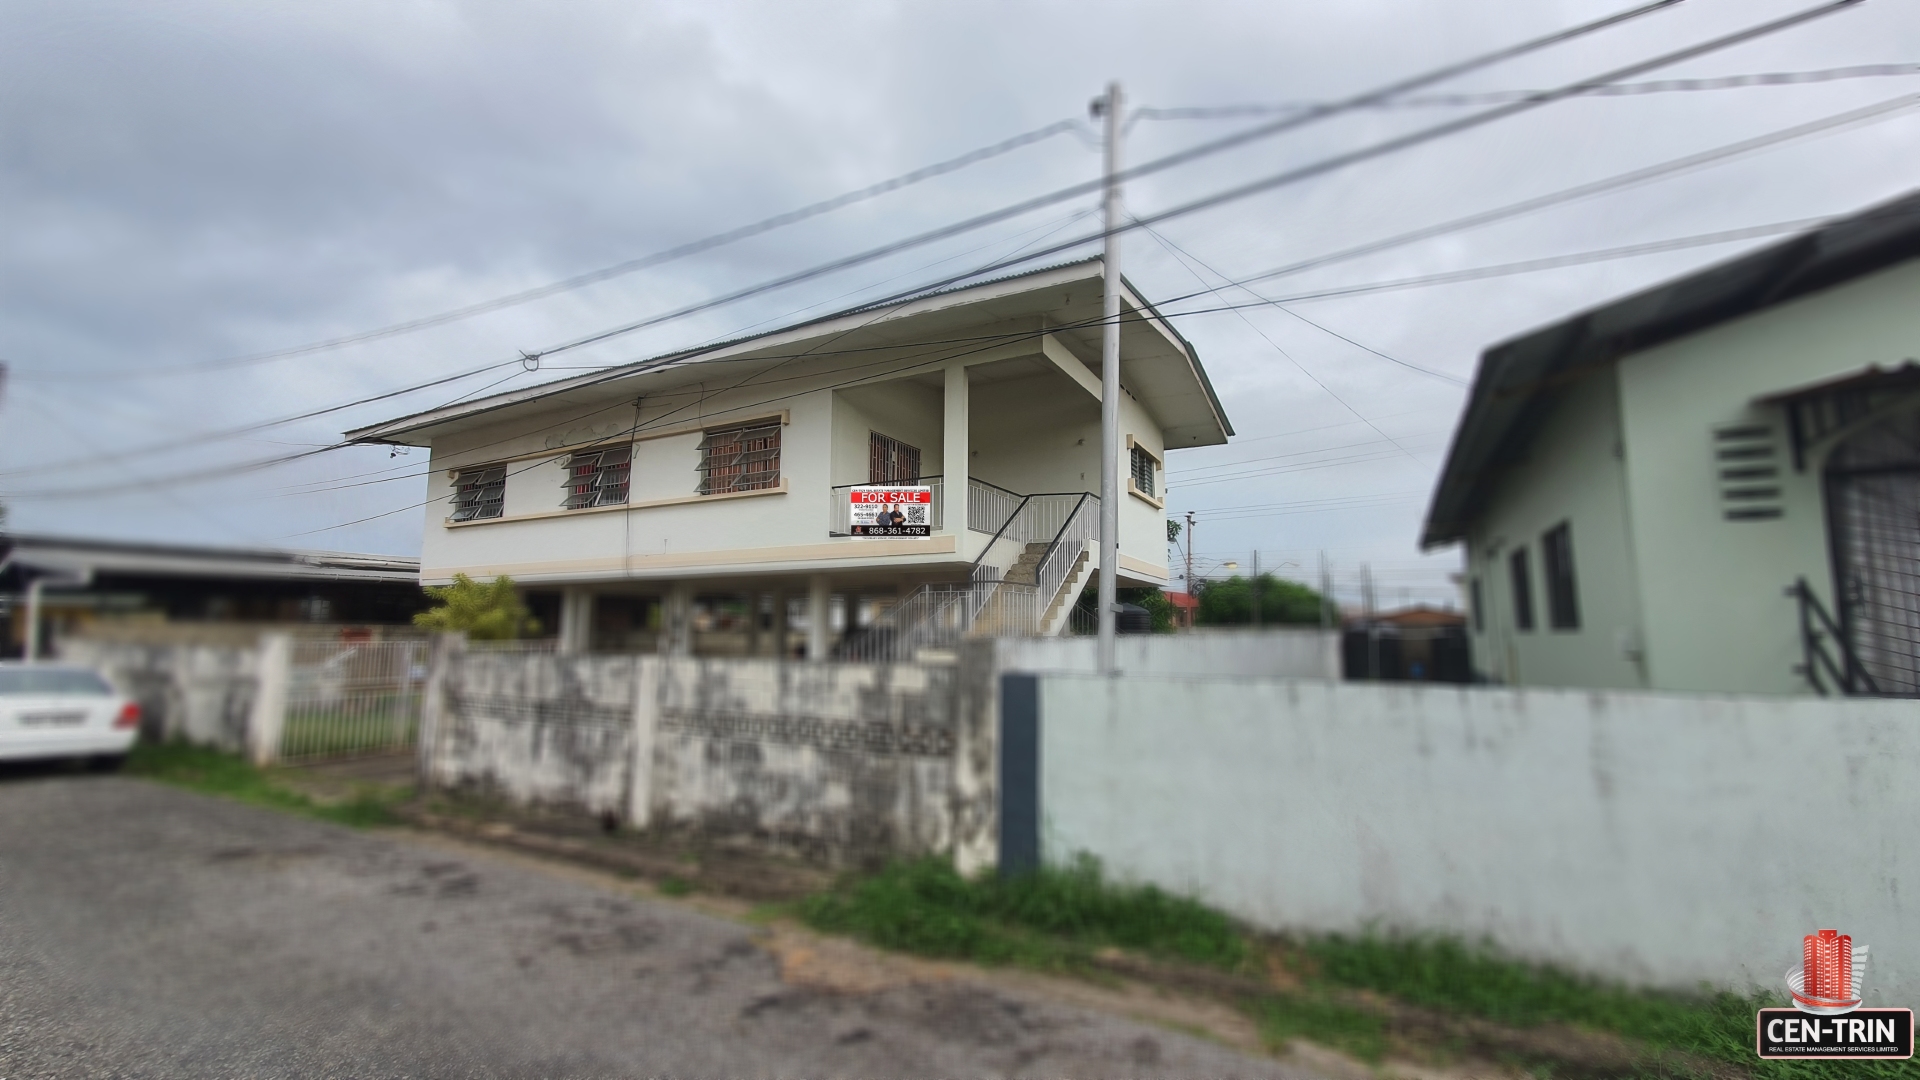 Tunapuna Property for Sale: Exterior view of a 3-bedroom house in a desirable Tunapuna location